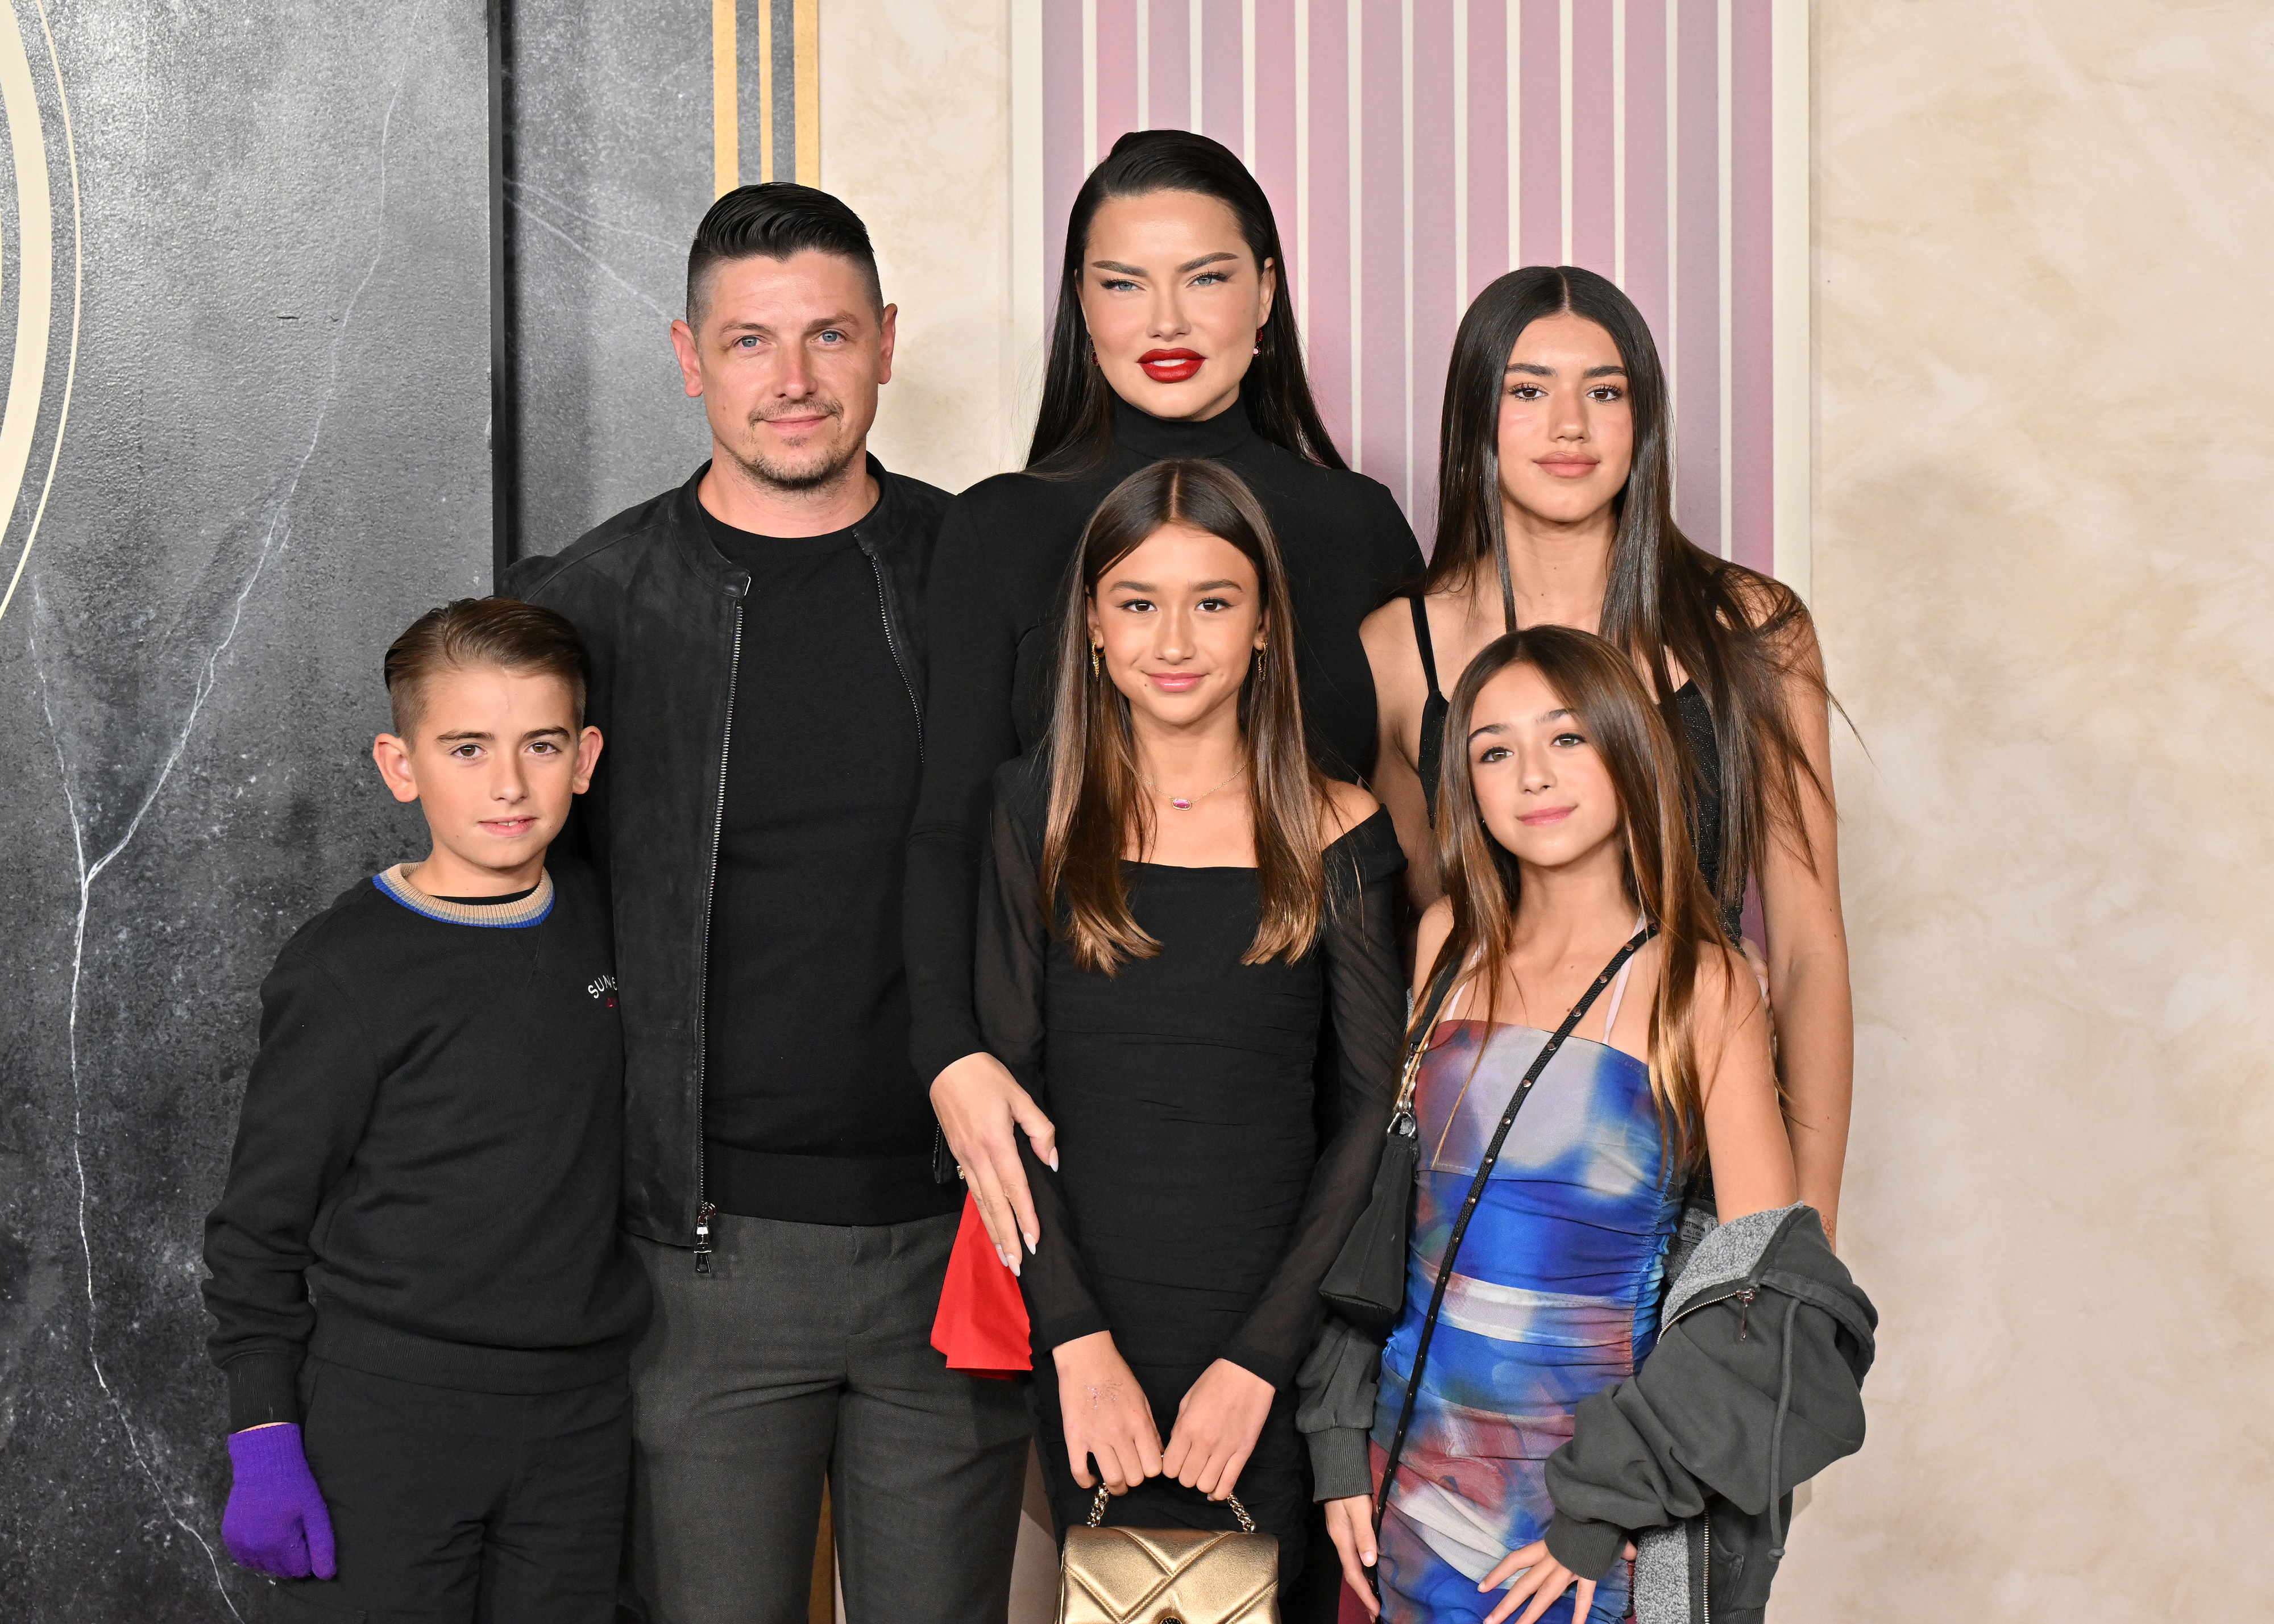 Adriana and her family on the red carpet